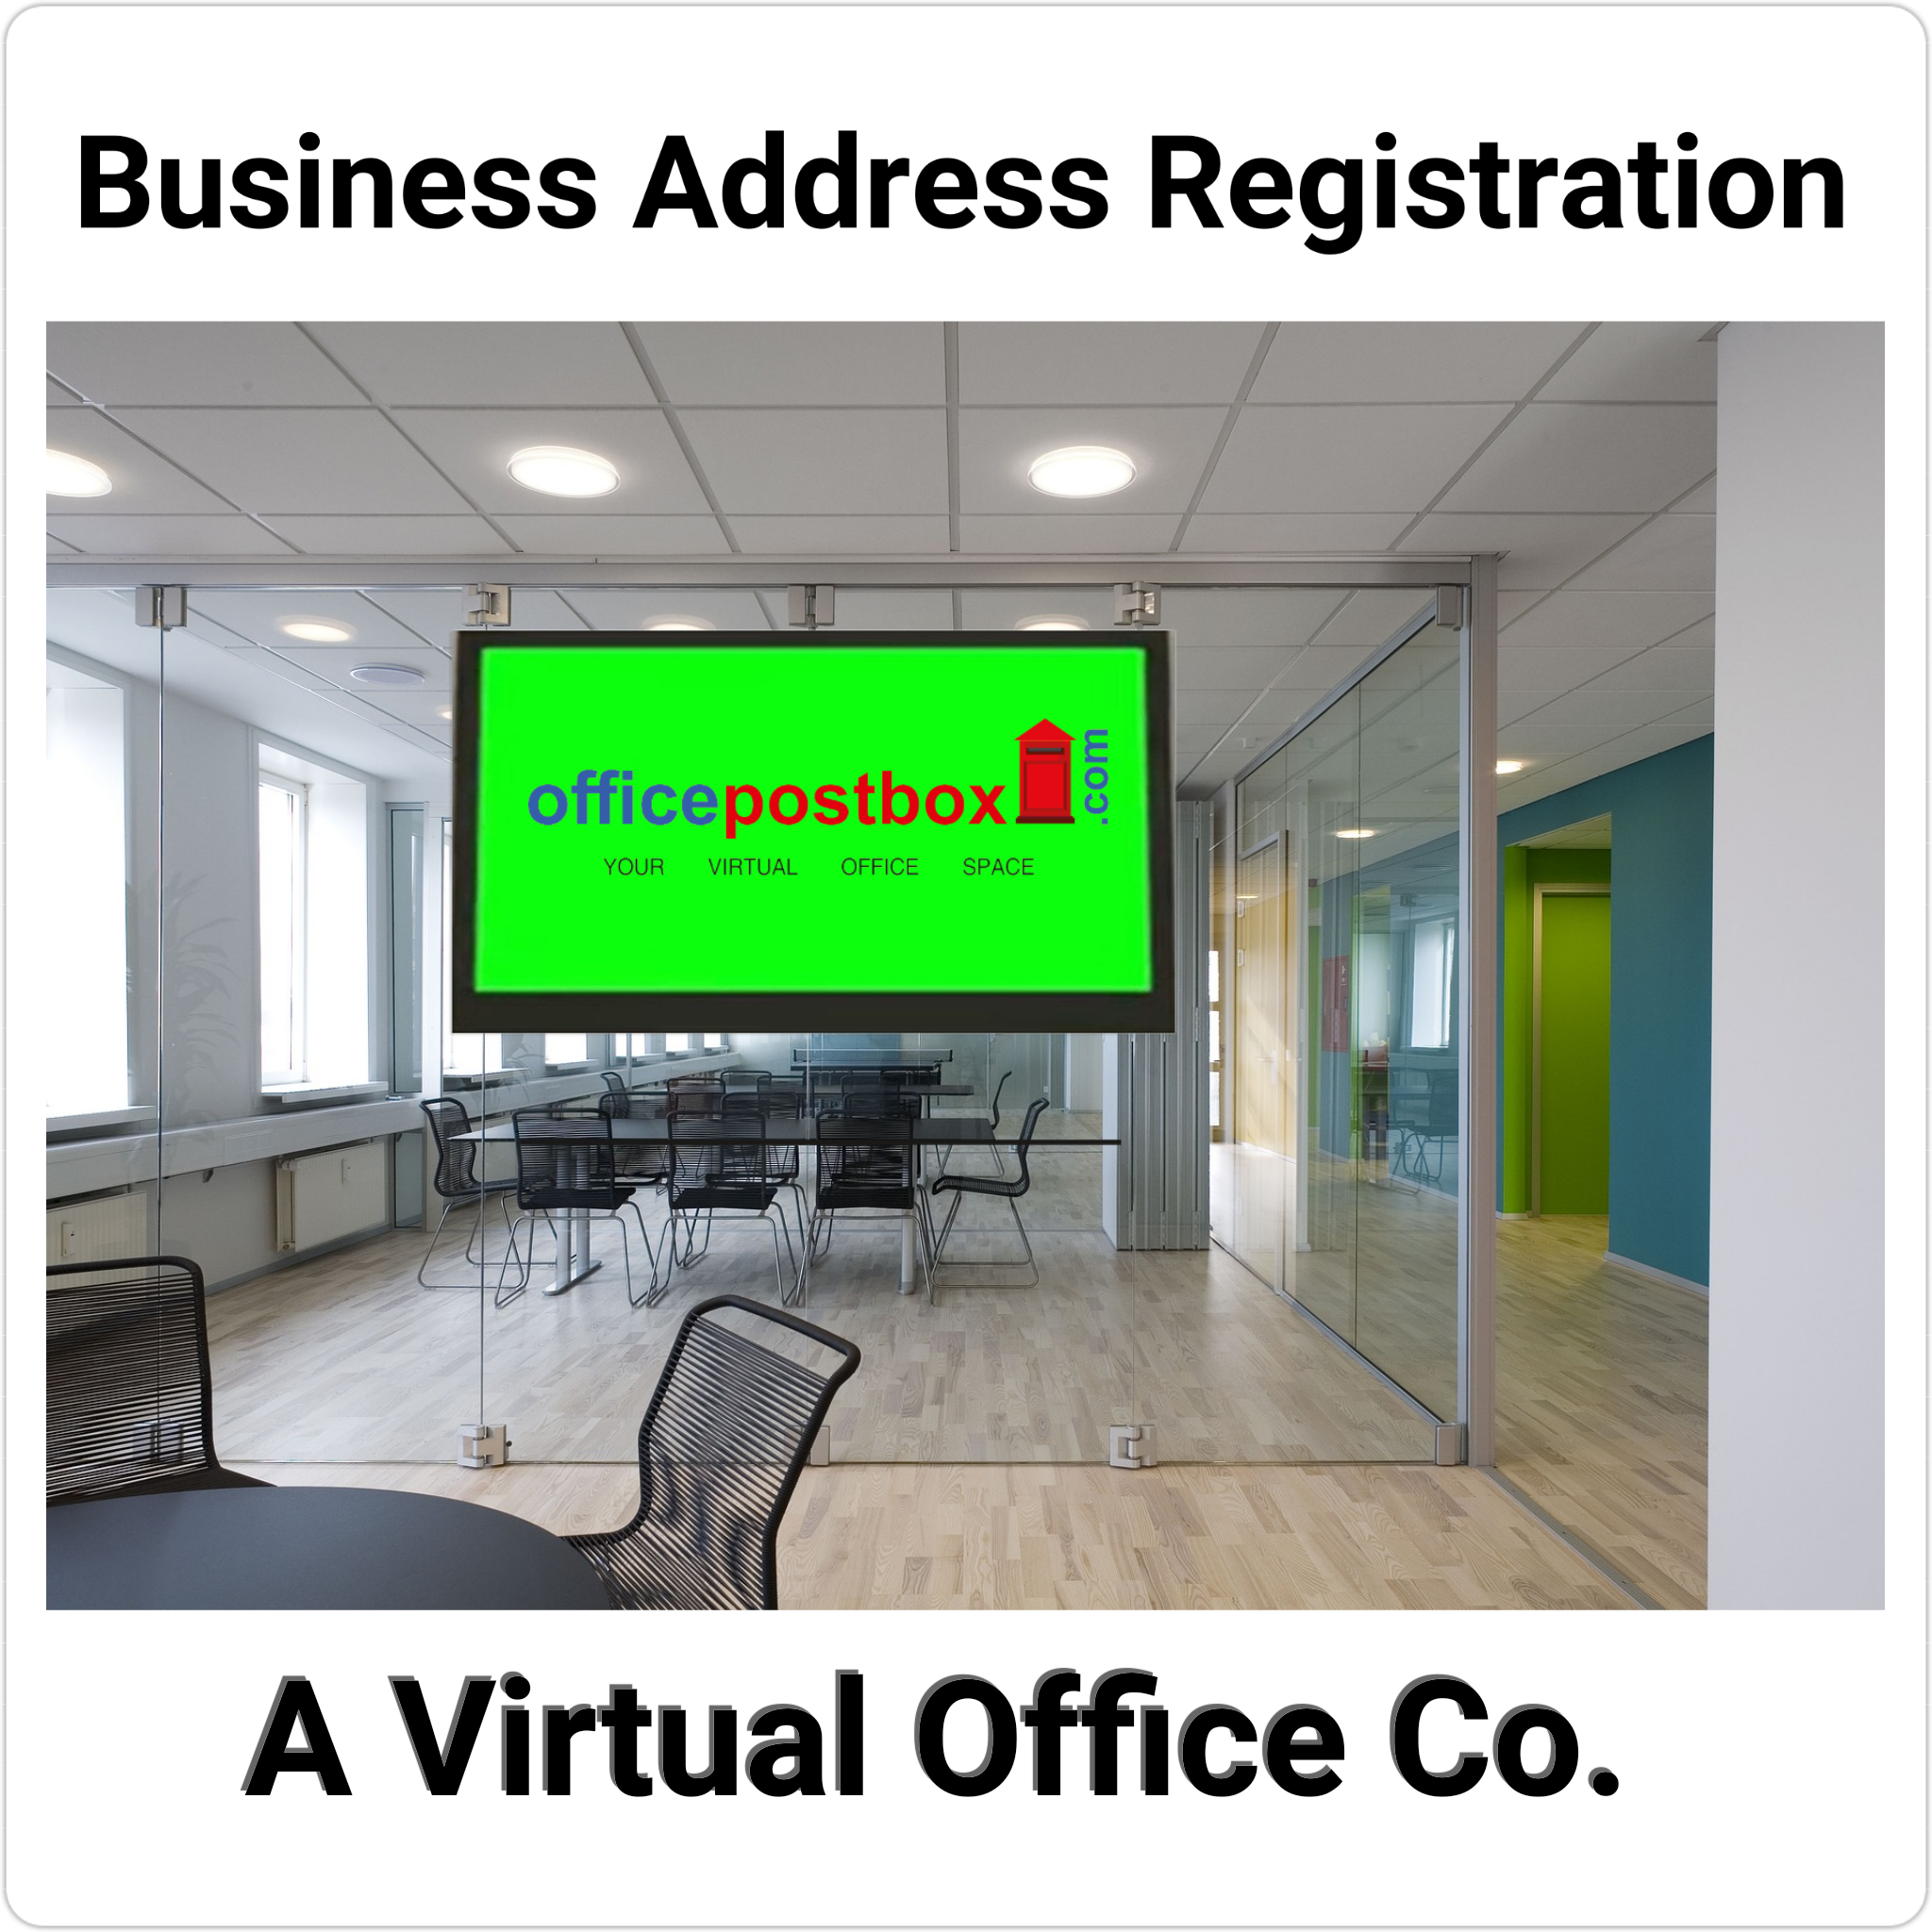 Virtual Office Benefits for Small Business COVID19 Era.